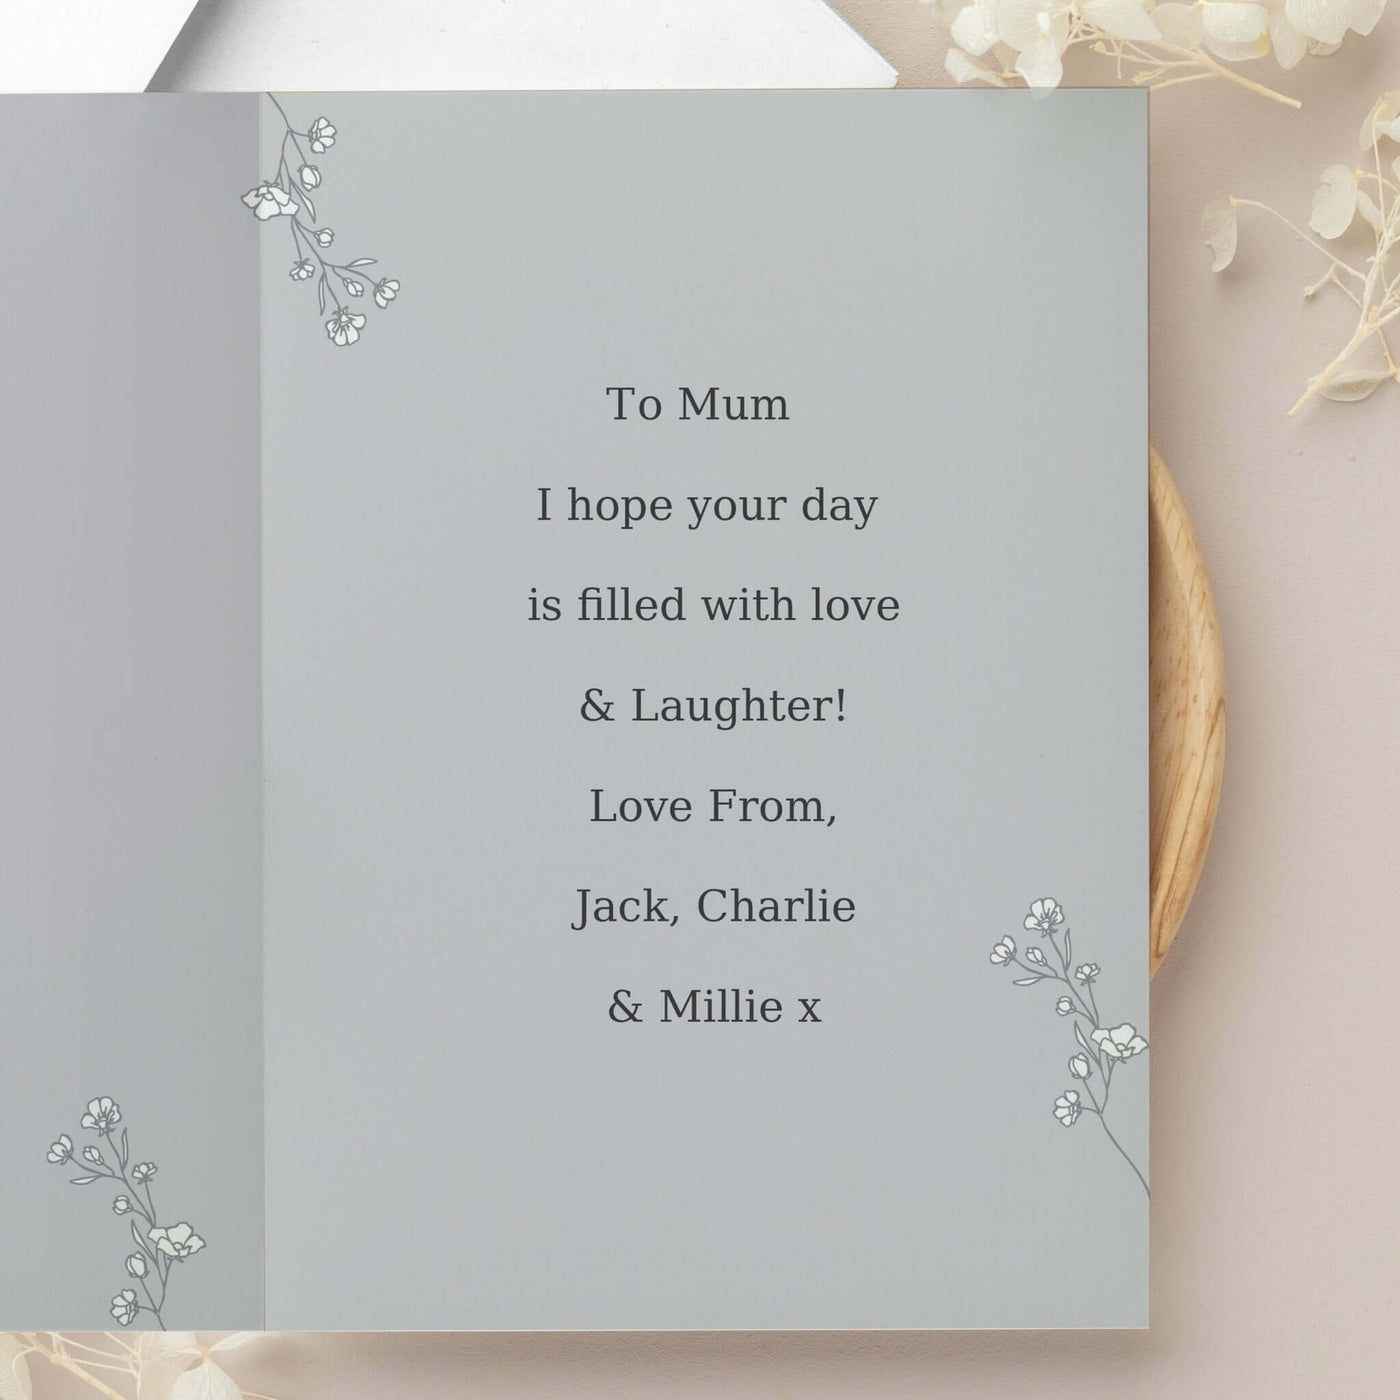 Personalised Grey Snapshot Photo Upload Greeting Card - LIVE LAUGH LOVE LIMITED